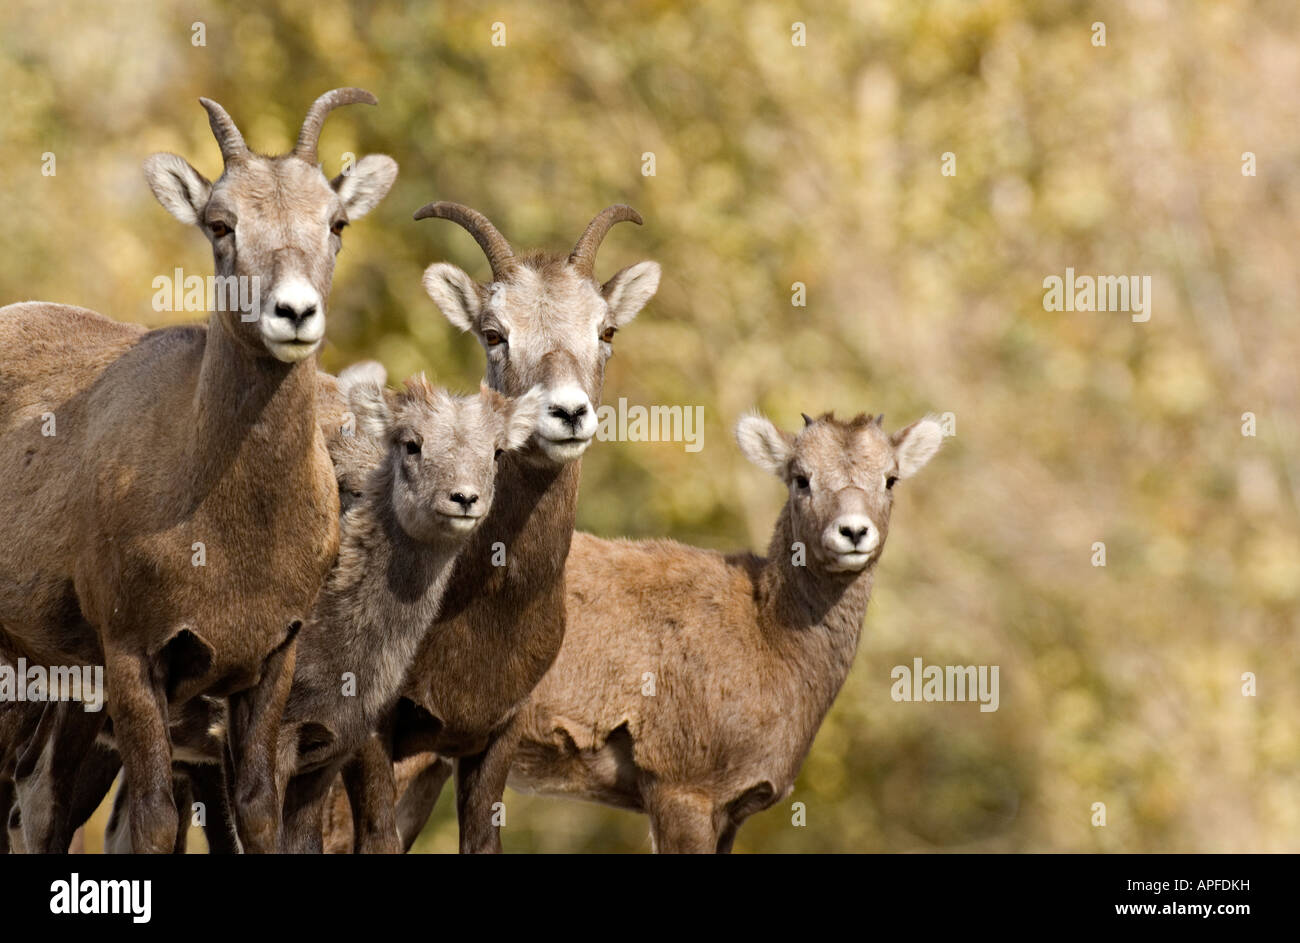 A family of Bighorn Sheep Stock Photo